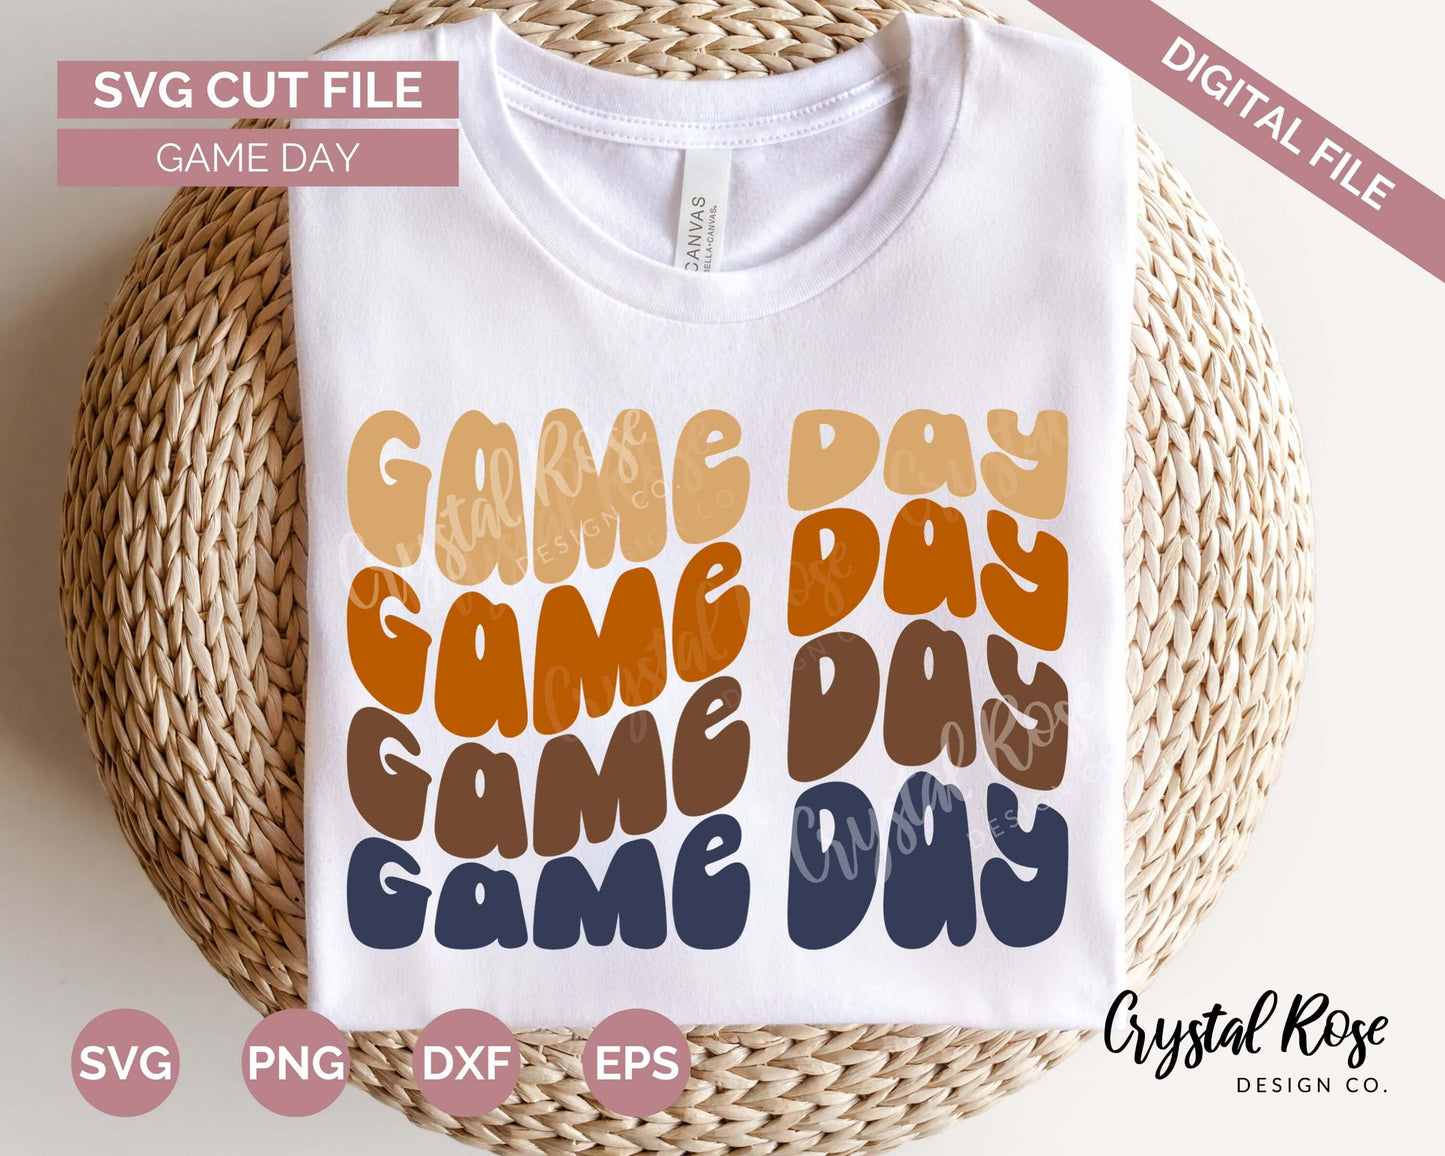 Game Day SVG, Fall SVG, Digital Download, Cricut, Silhouette, Glowforge (includes svg/png/dxf/eps)